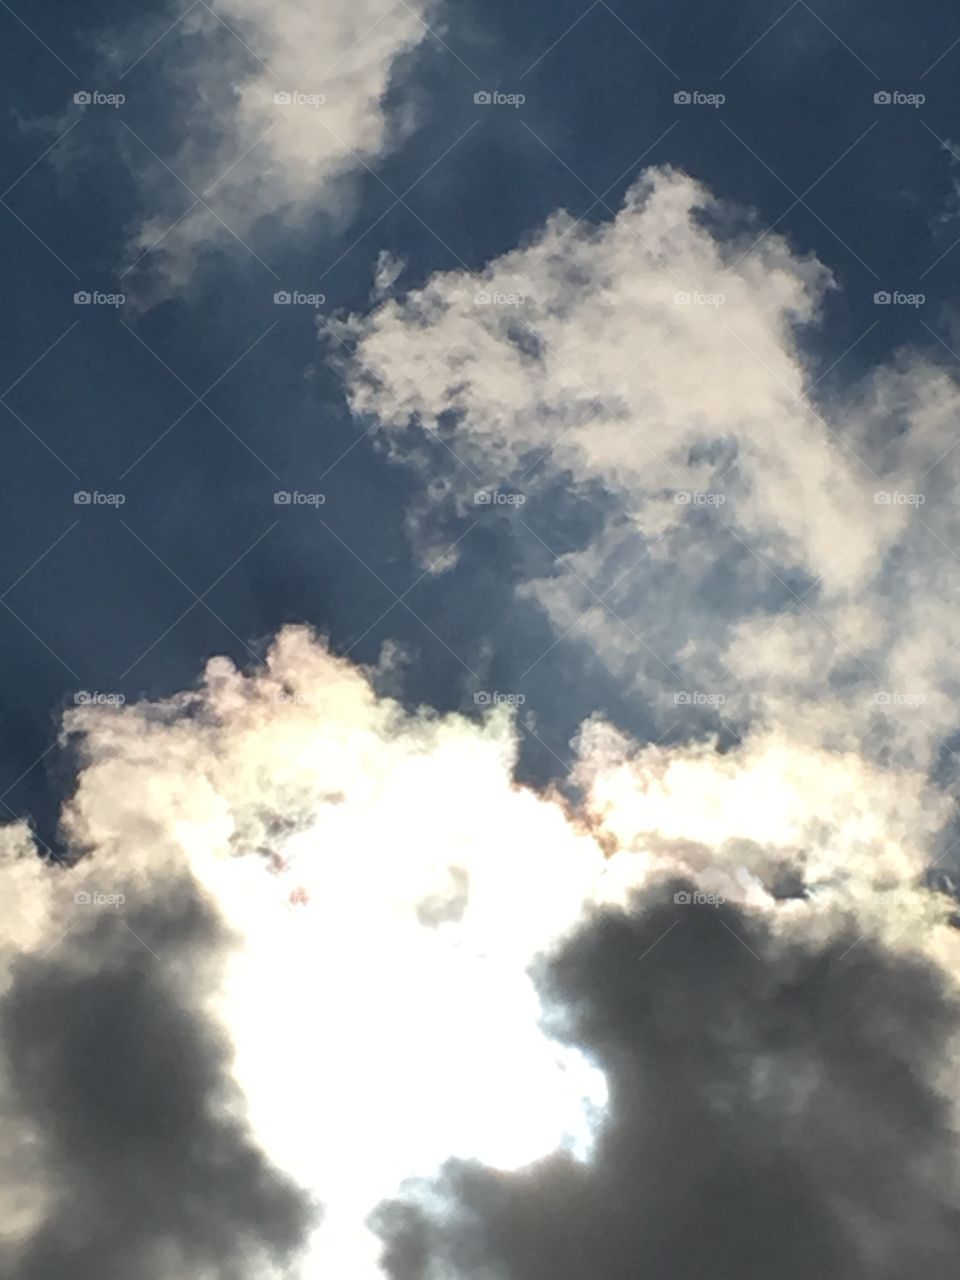 Eclipse hiding behind clouds  8/21/18